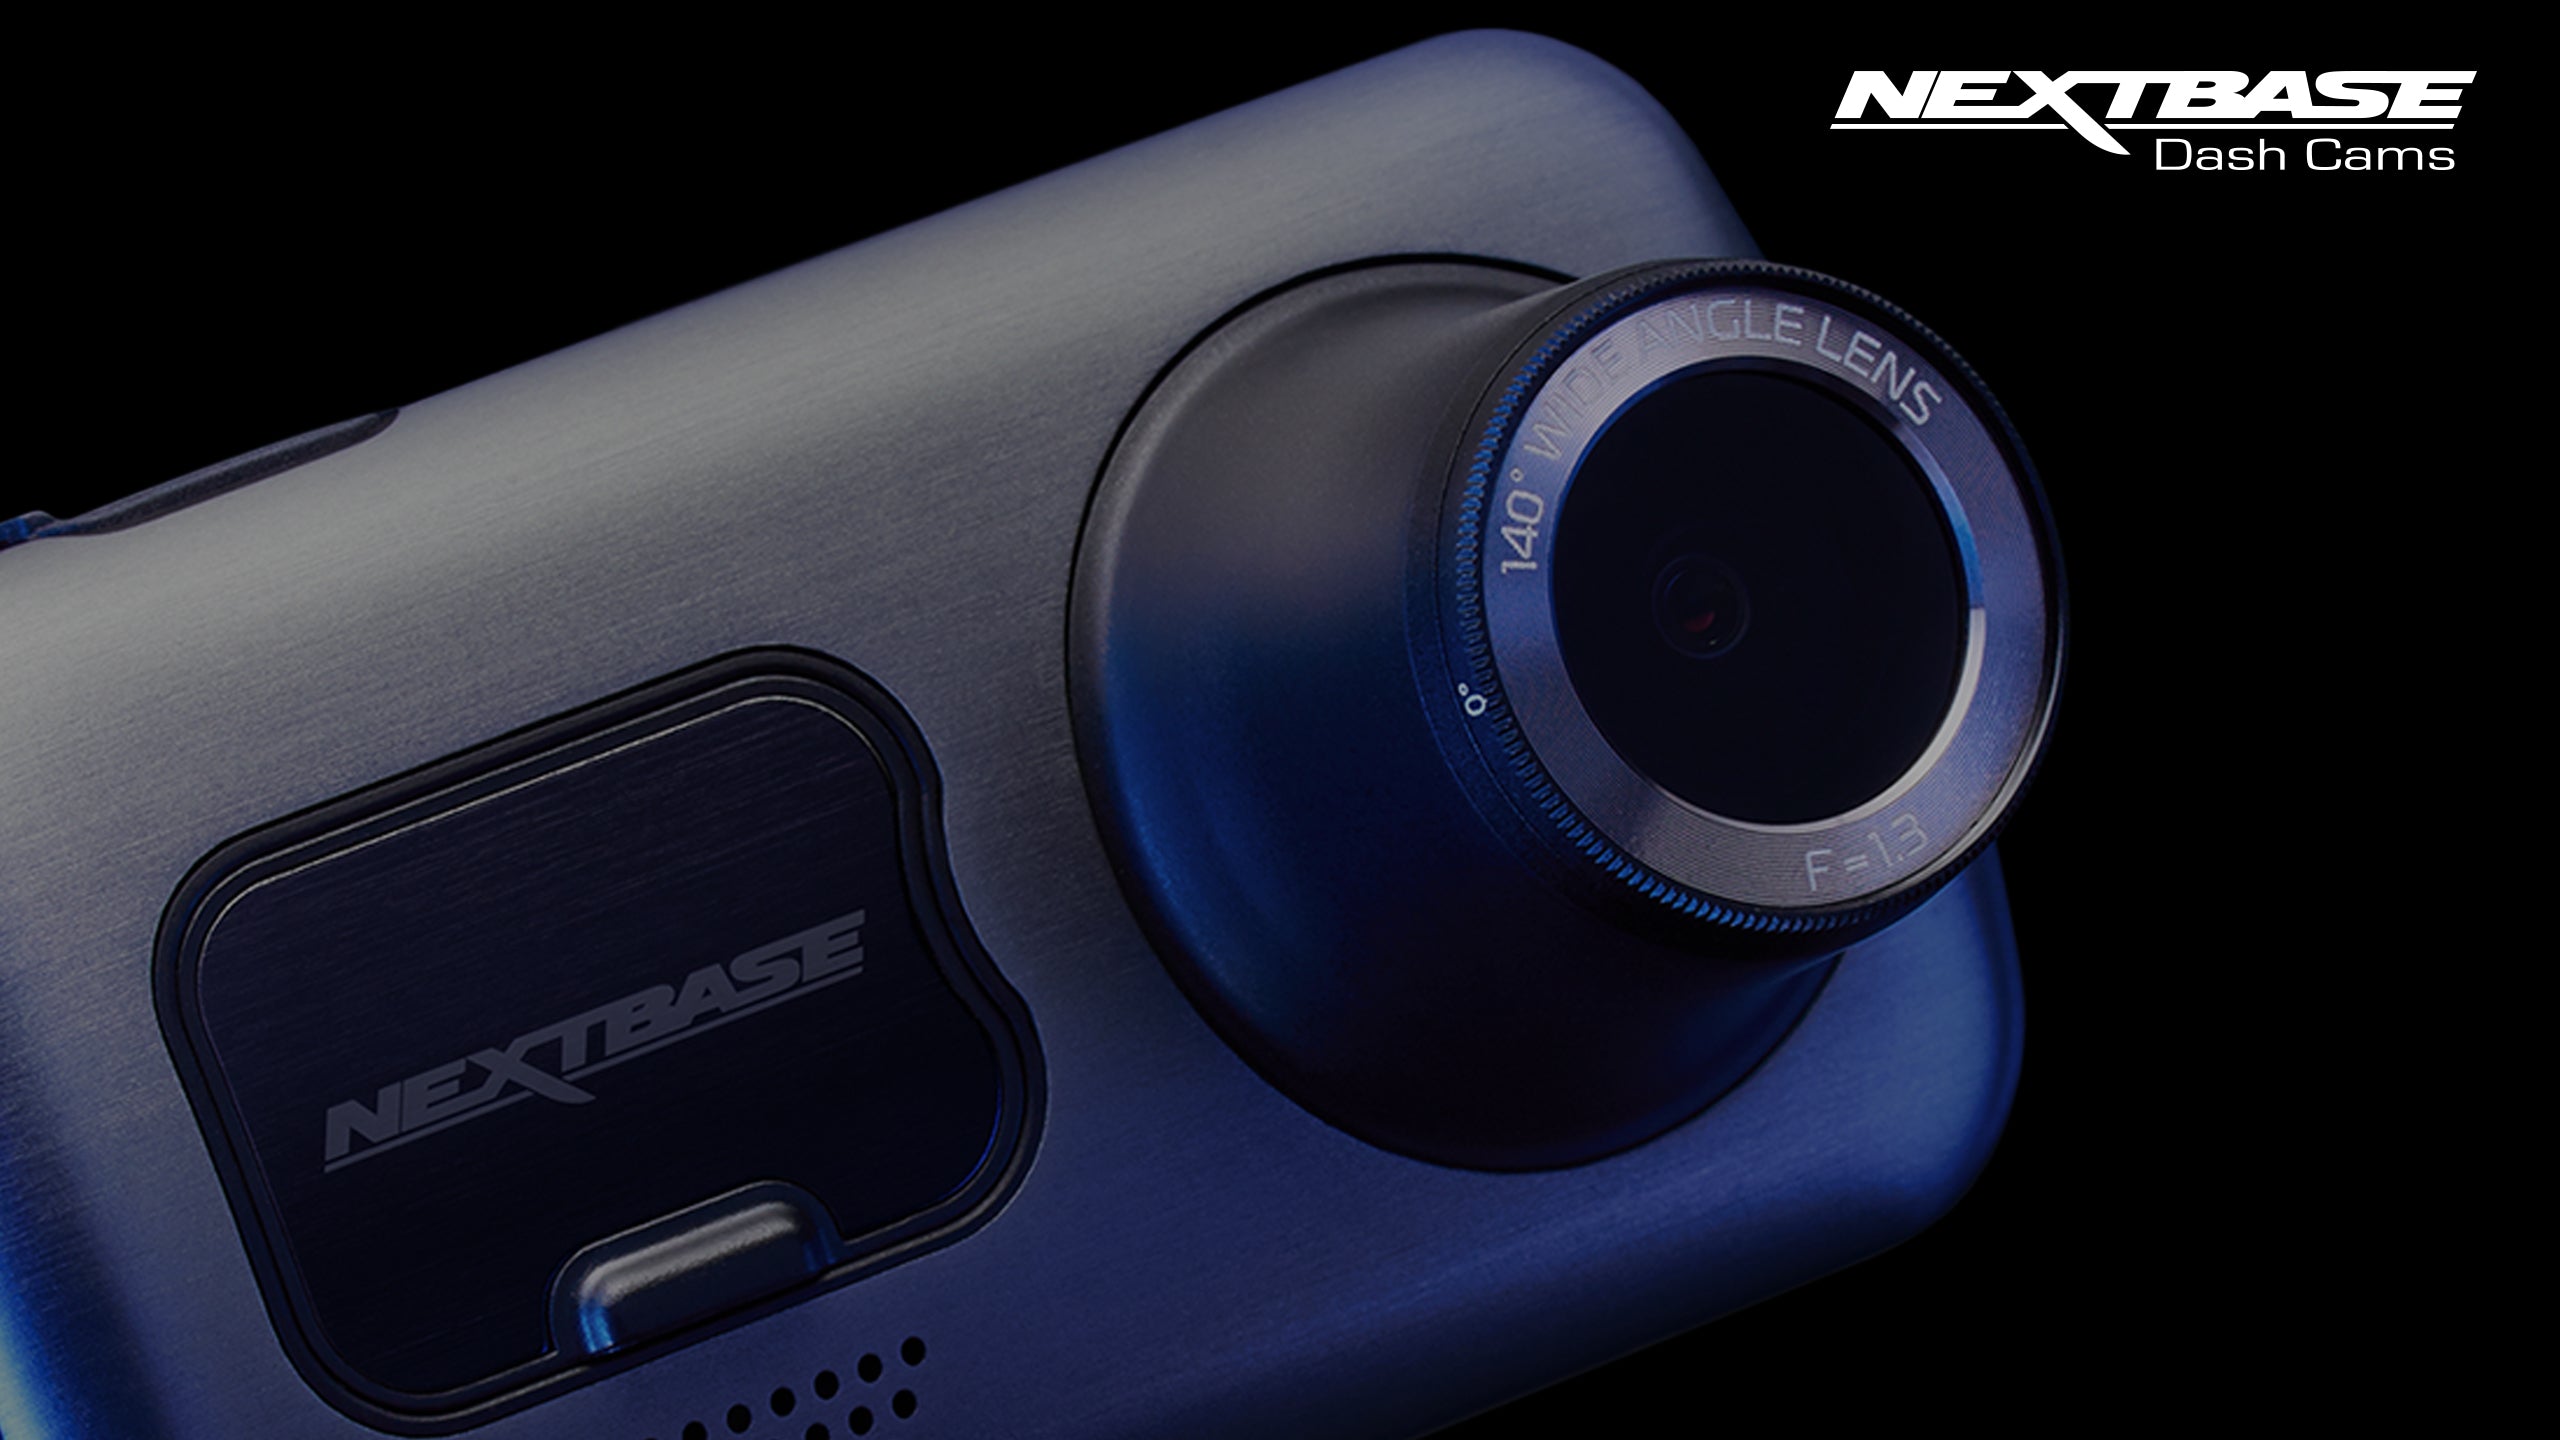 The Nextbase Dash Cam is on sale for 25% off